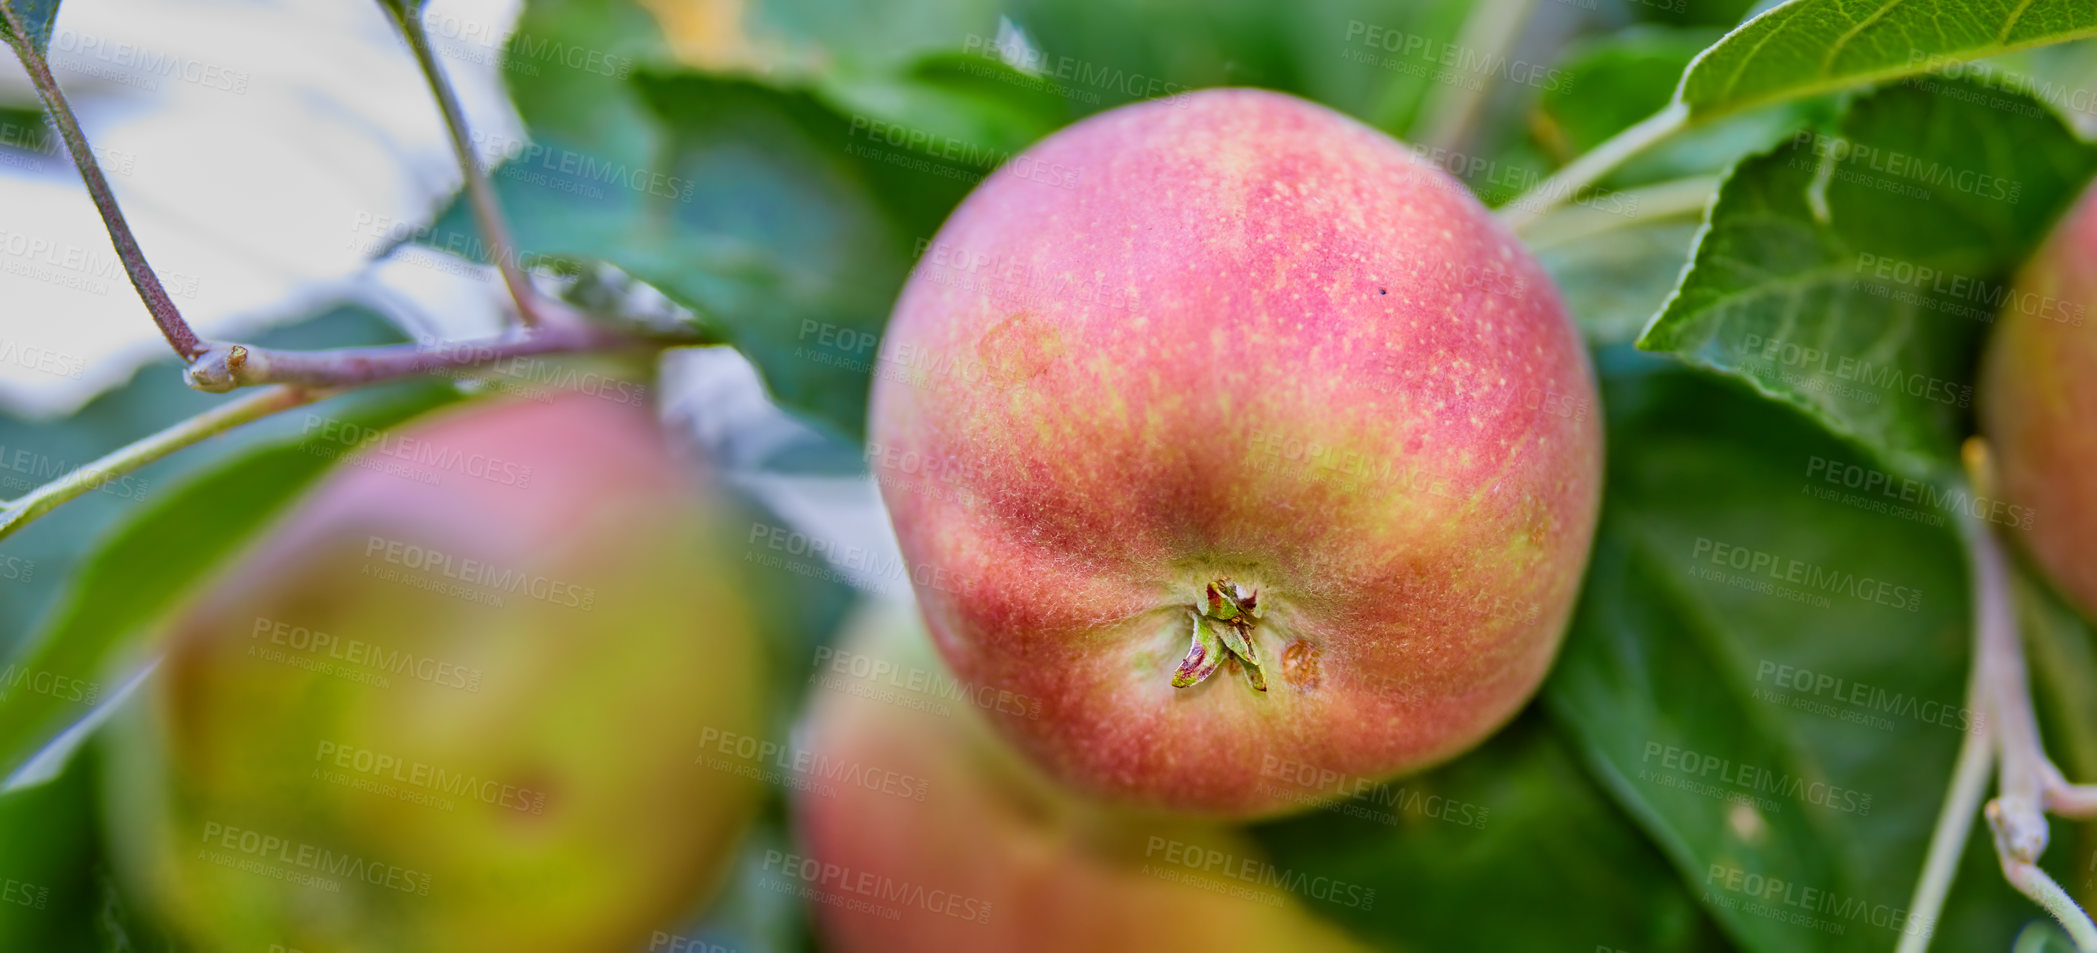 Buy stock photo Fresh red apples growing on trees for harvest in an orchard or grove on a sunny day outdoors. Closeup of ripe, juicy and sweet produce cultivated in season on an organic farm or fruit plantation